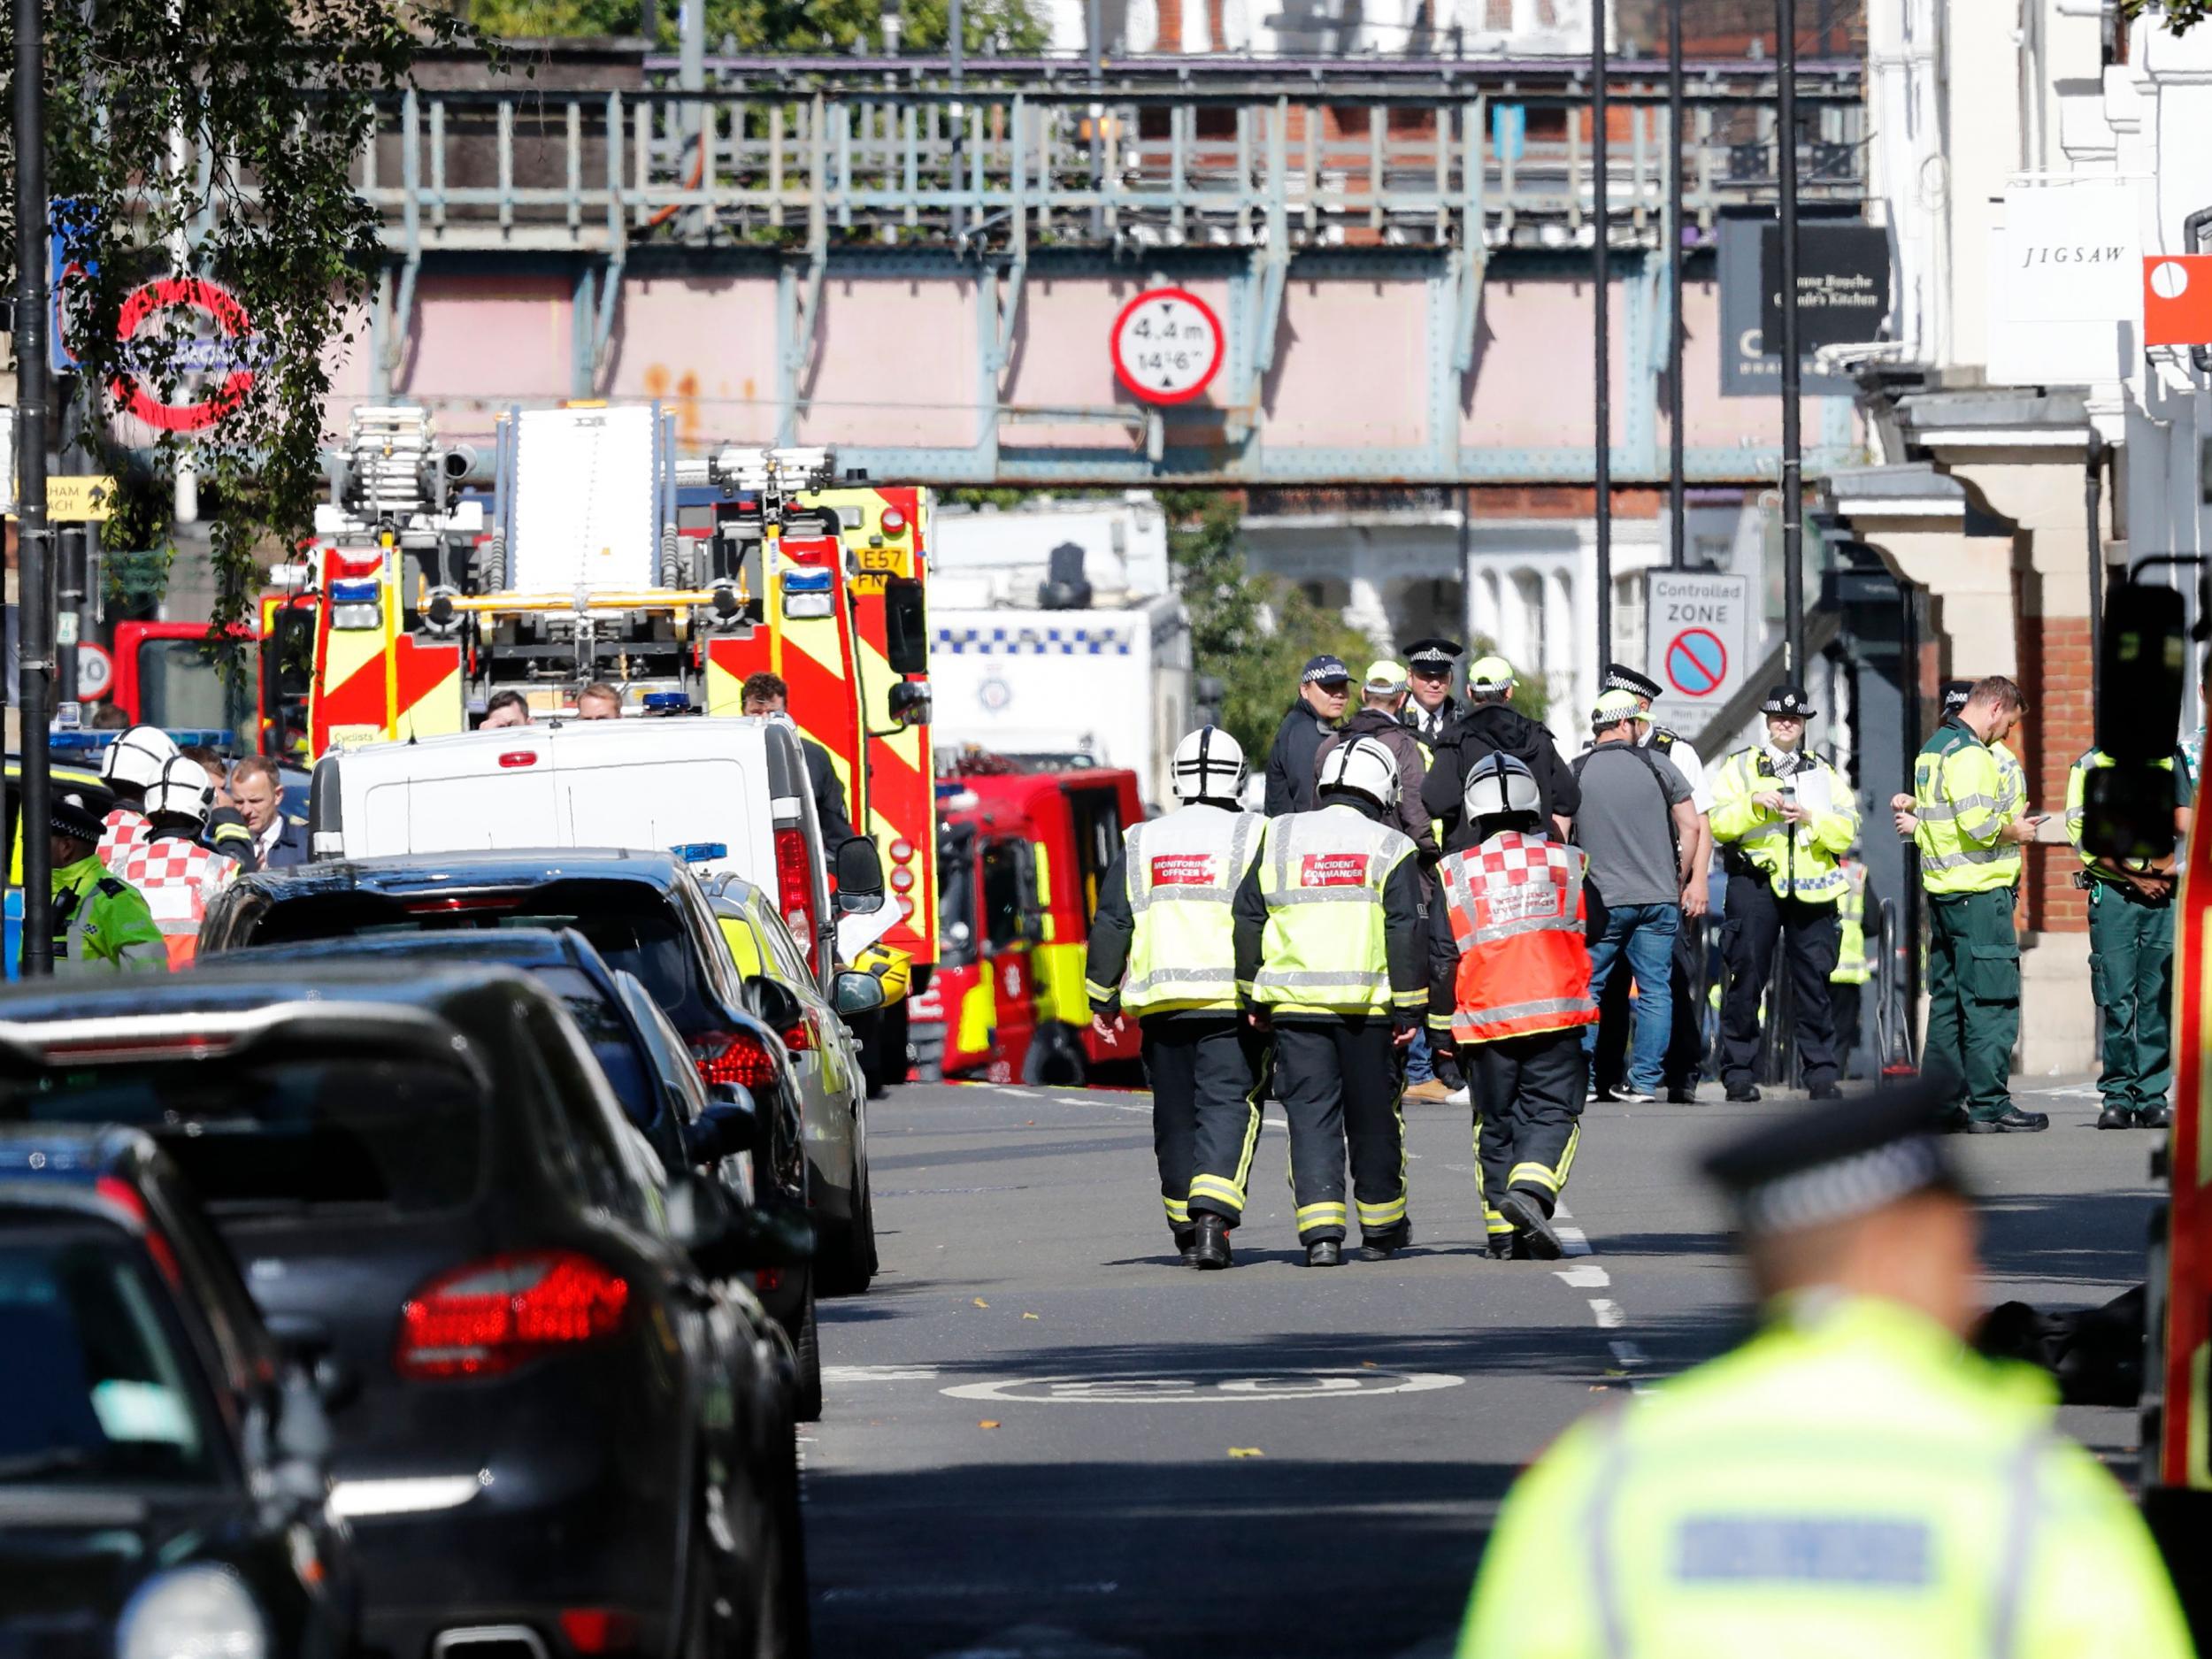 30 people were injured when the bomb partially exploded on a District Line train